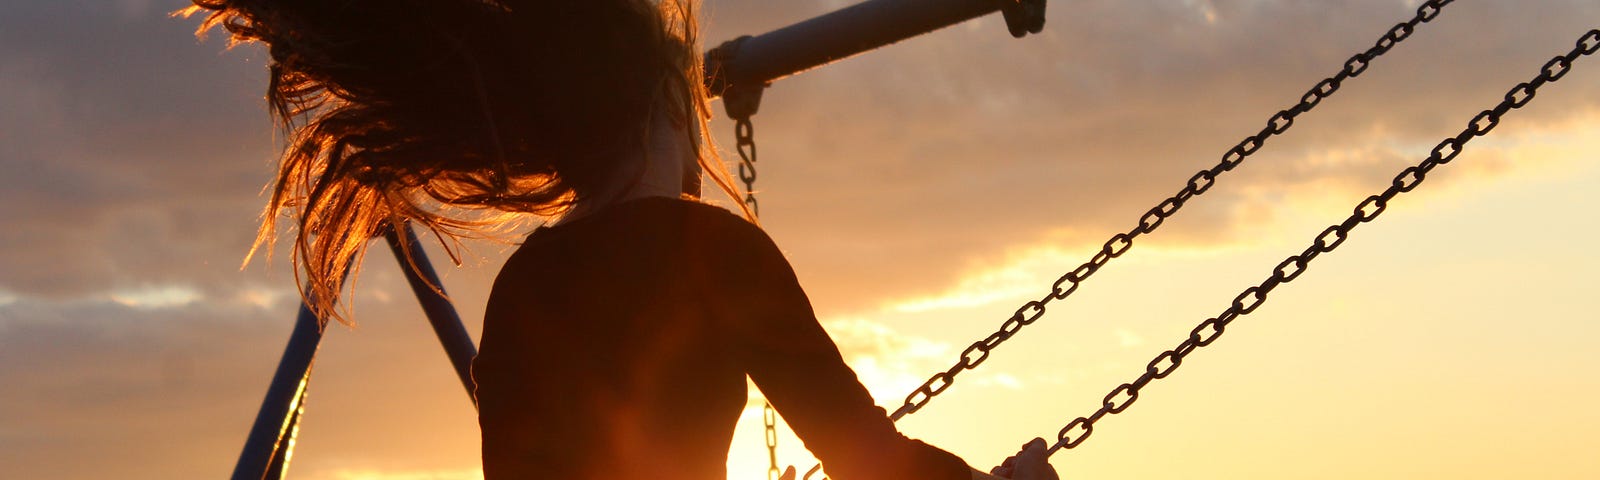 Girl on swing at sunset with her hair flying behind her.